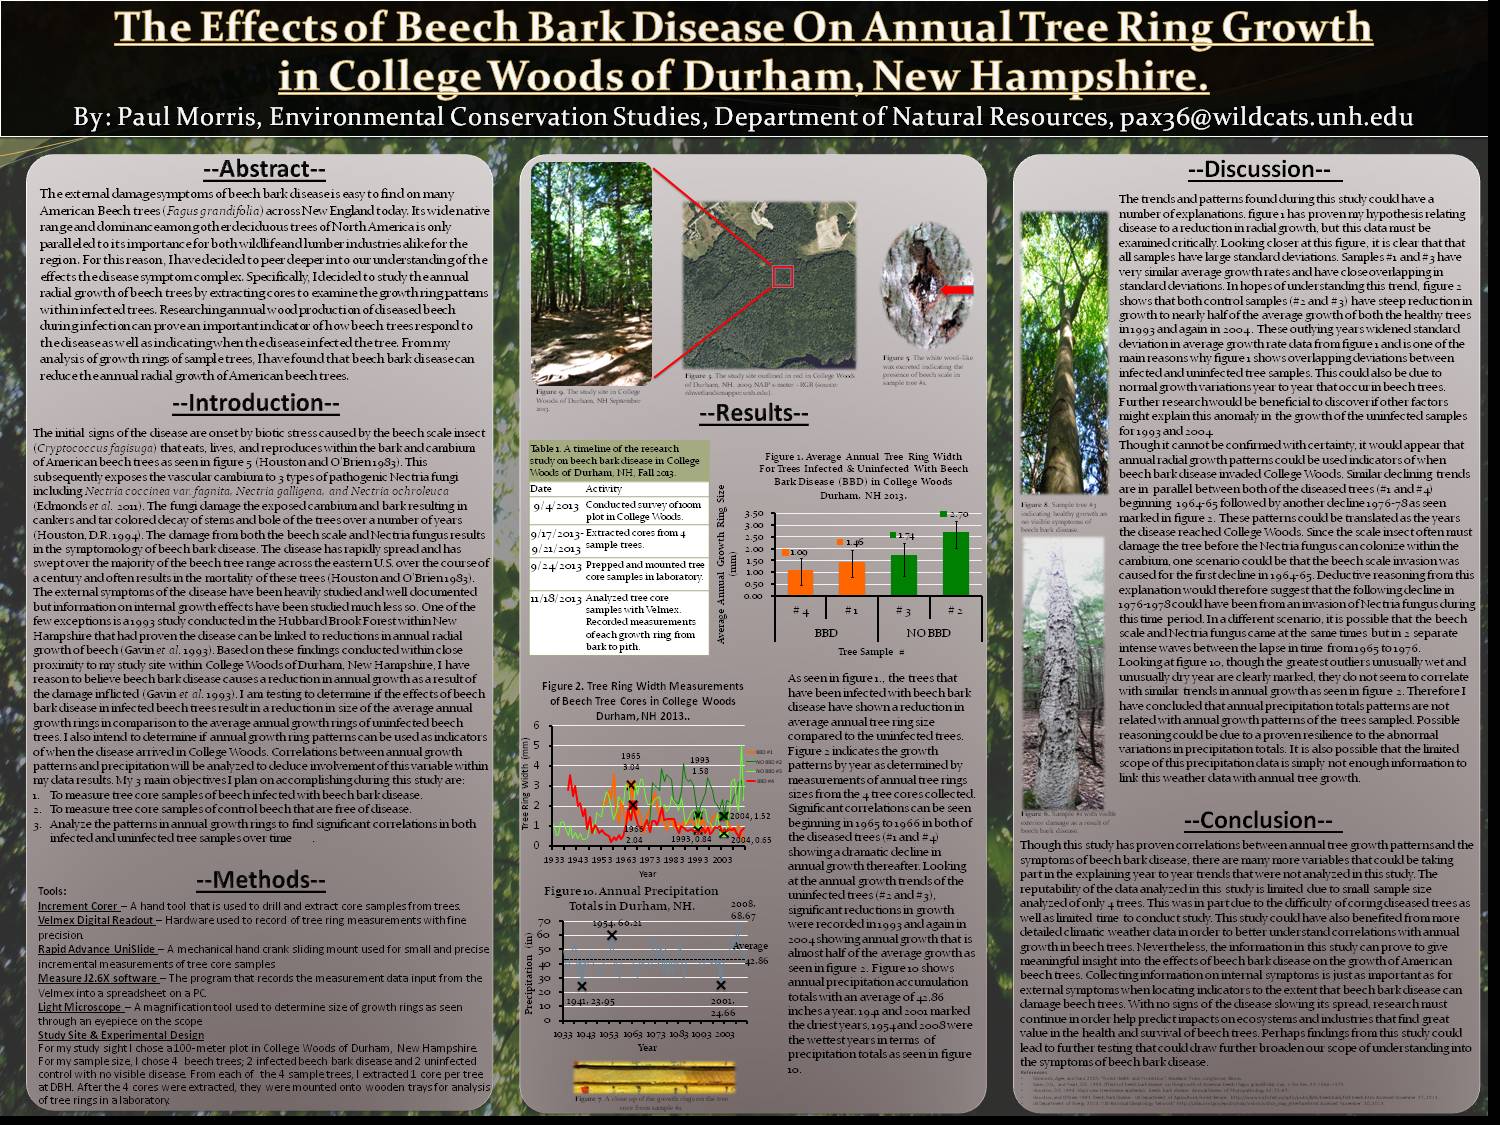 The Effects Of Beech Bark Disease On Annual Tree Ring Growth In College Woods Of Durham, New Hampshire by pax36